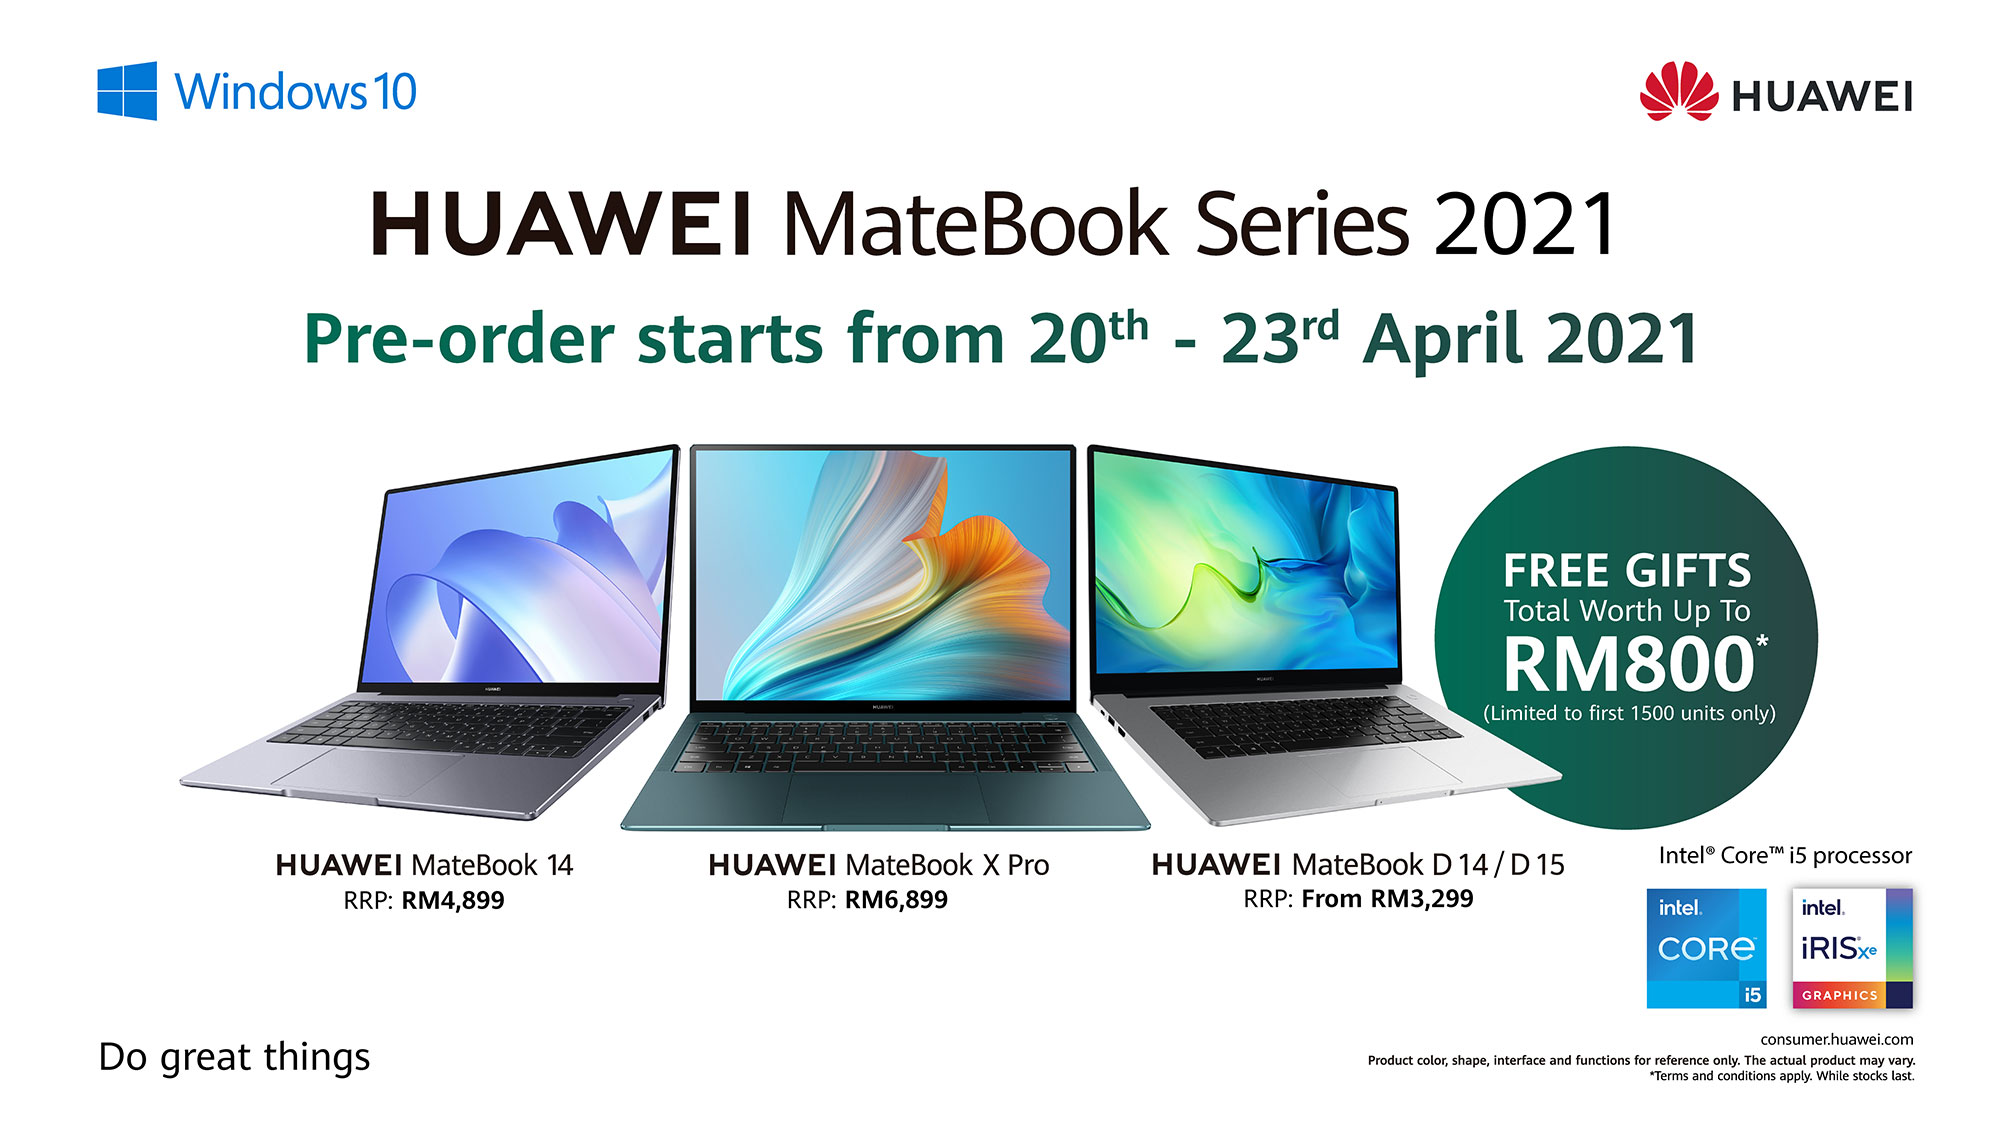 HUAWEI MateBook Series 2021 Officially Launched in Malaysia